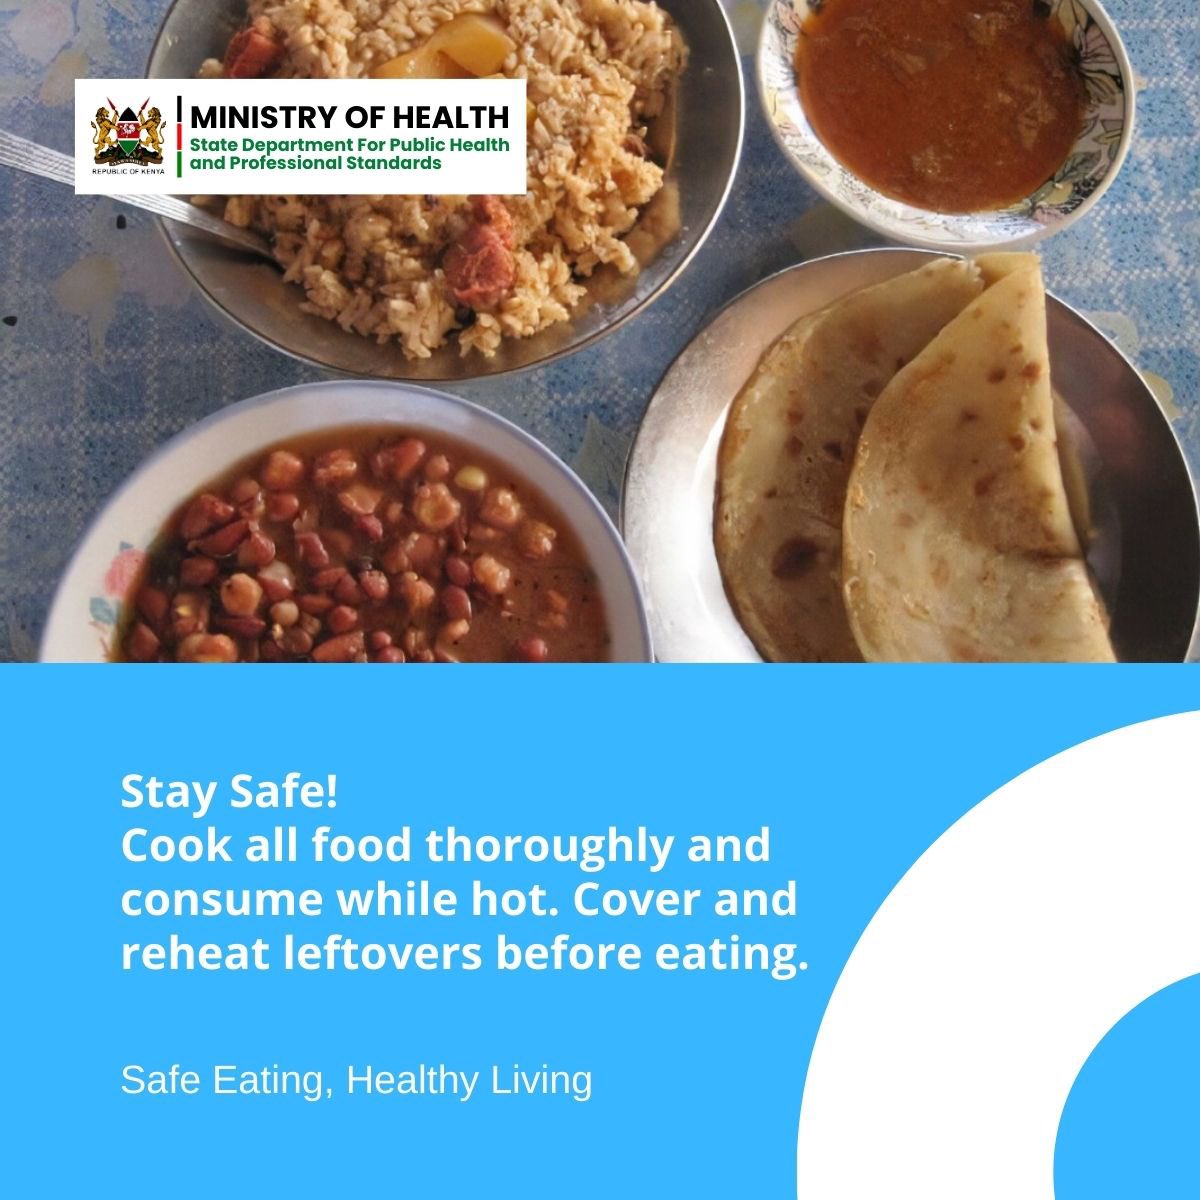 Enjoy a safe and healthy Christmas! Remember: Cook food thoroughly, eat while hot, and reheat leftovers properly. Safe Eating, Healthy Living. #AfyaNyumbani